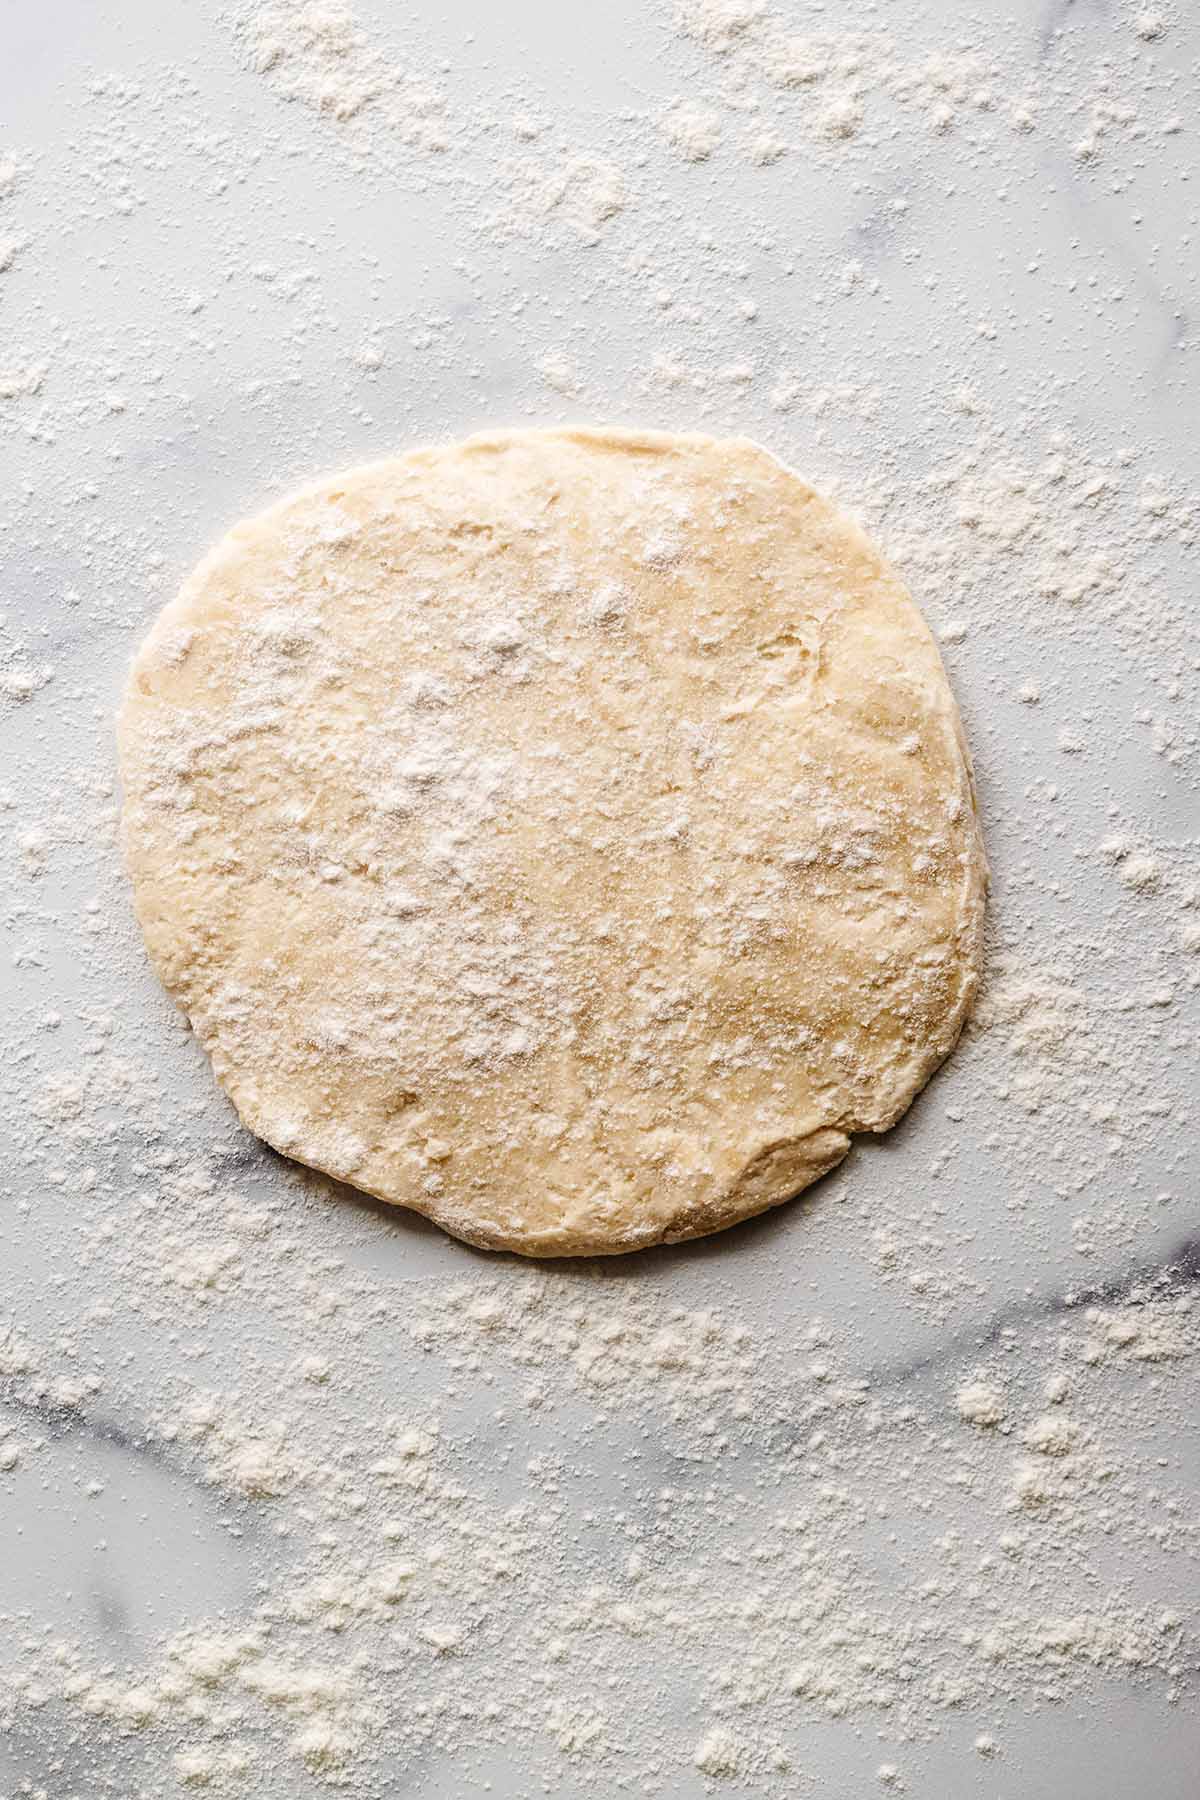 Raw crust dough on a floured marble countertop with flour sprinkled over the top